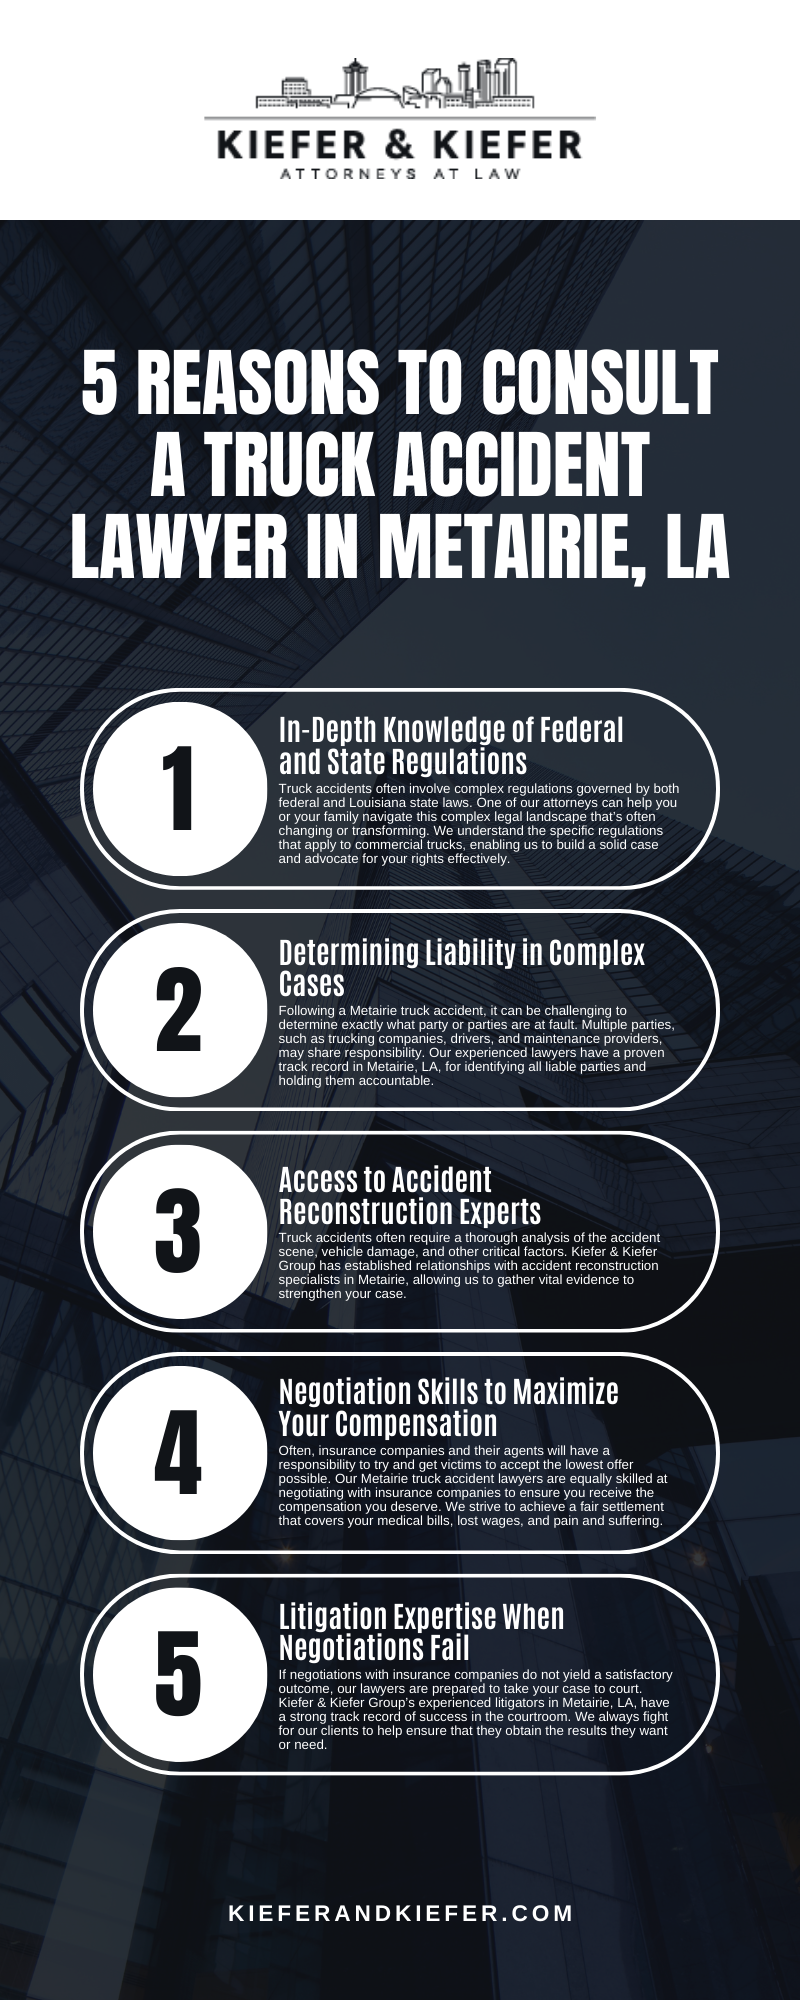 5 Reasons To Consult A Truck Accident Lawyer In Metairie, LA Infographic